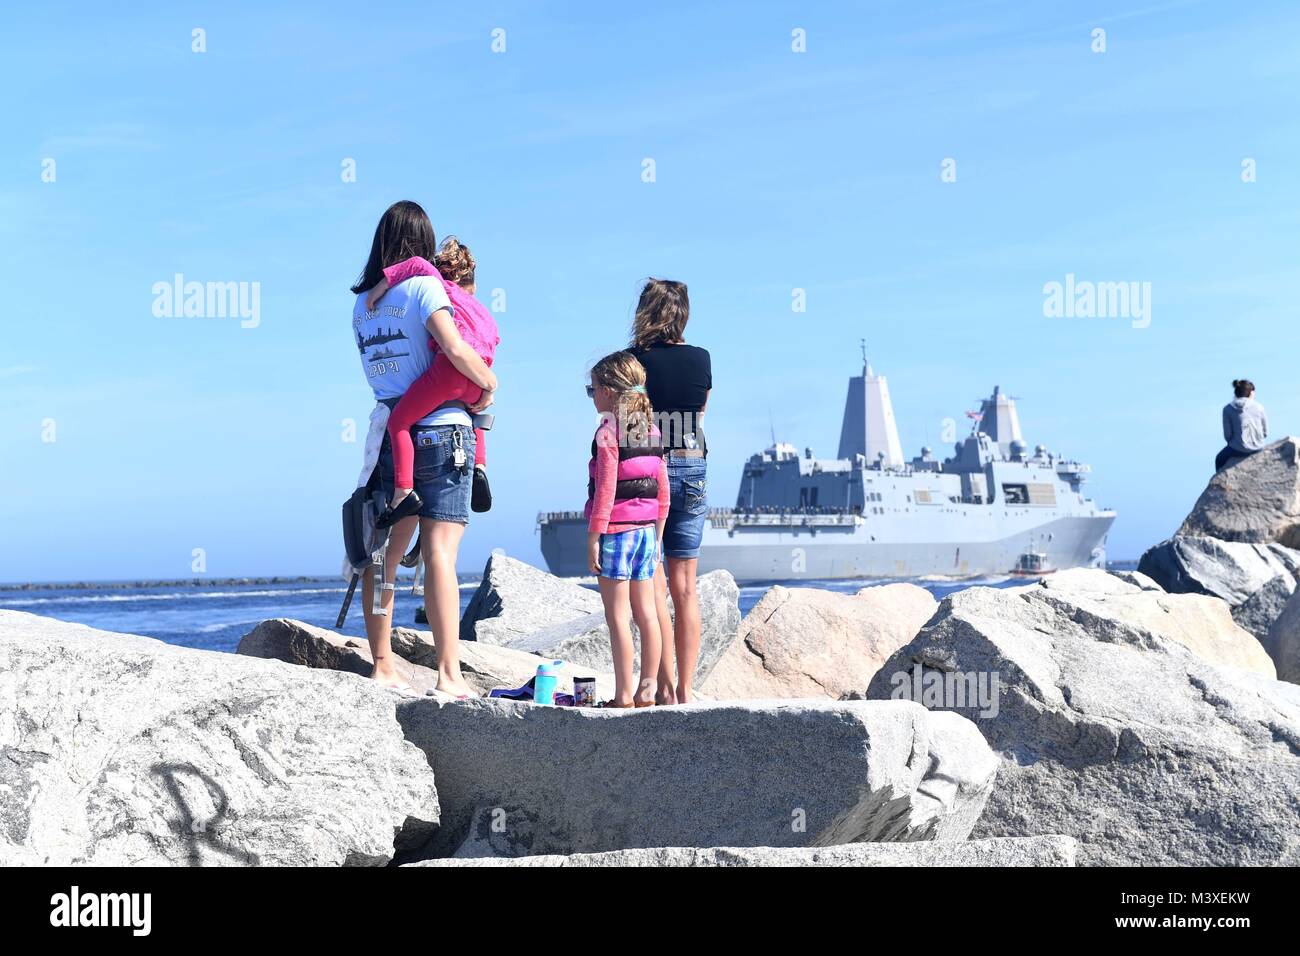 180207-N-JX484-090 JACKSONVILLE, Fla. (Feb. 7, 2018) Family members observe as the amphibious transport dock ship USS New York (LPD 21) departs Naval Station Mayport for a scheduled six-month deployment. The New York is deploying as part of the Iwo Jima Amphibious Assault Ready Group and with the 26th Marine Expeditionary Unit to conduct maritime security operations, crisis response and theater security cooperation, while also providing a forward naval presence in Europe and the Middle East. (U.S. Navy photo by Petty Officer 2nd Class Mark Andrew Hays/Released) Stock Photo